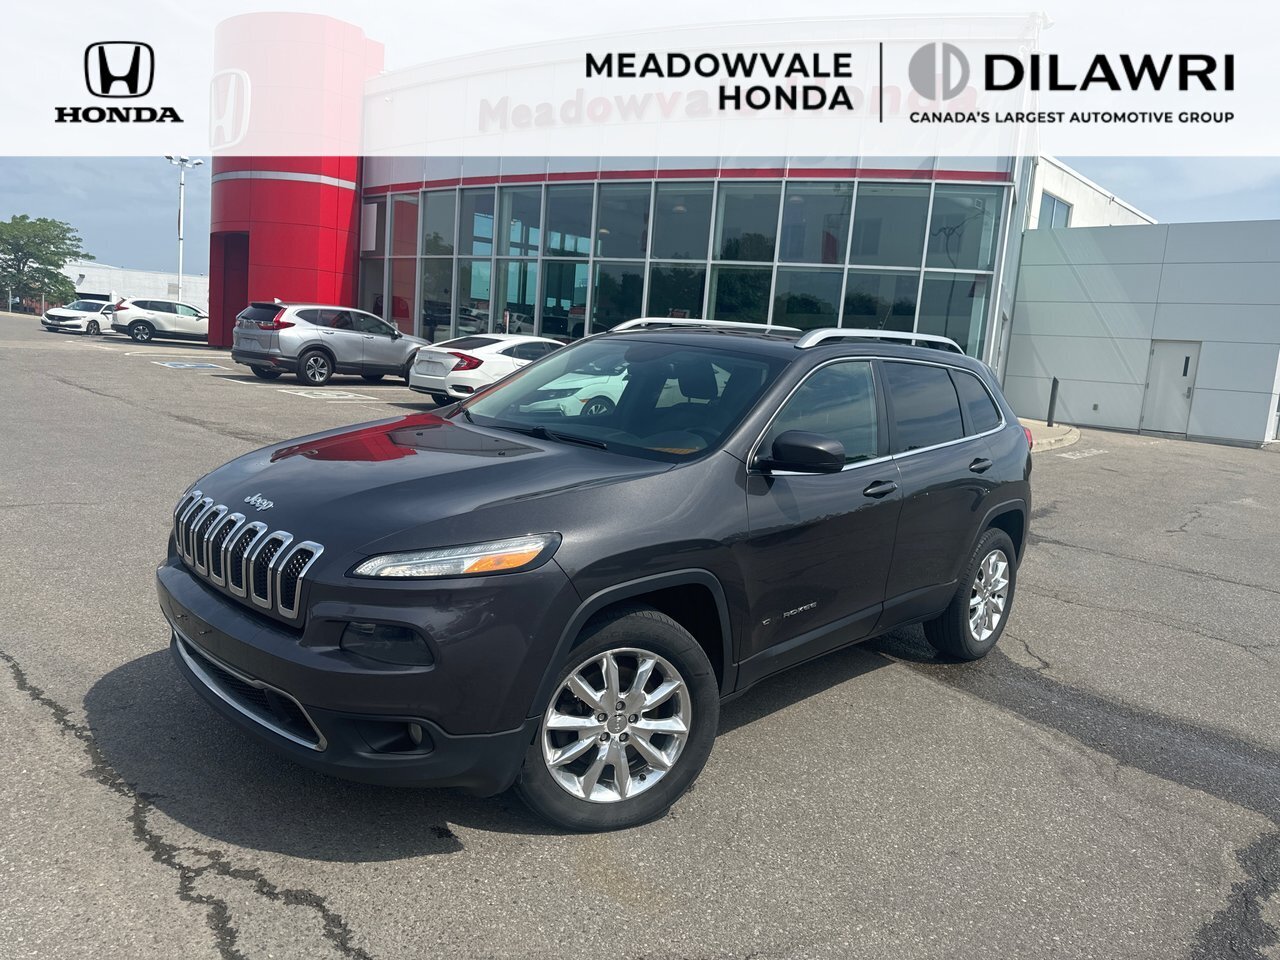 2014 Jeep Cherokee 4x4 Limited Accident Free | Heated Seats